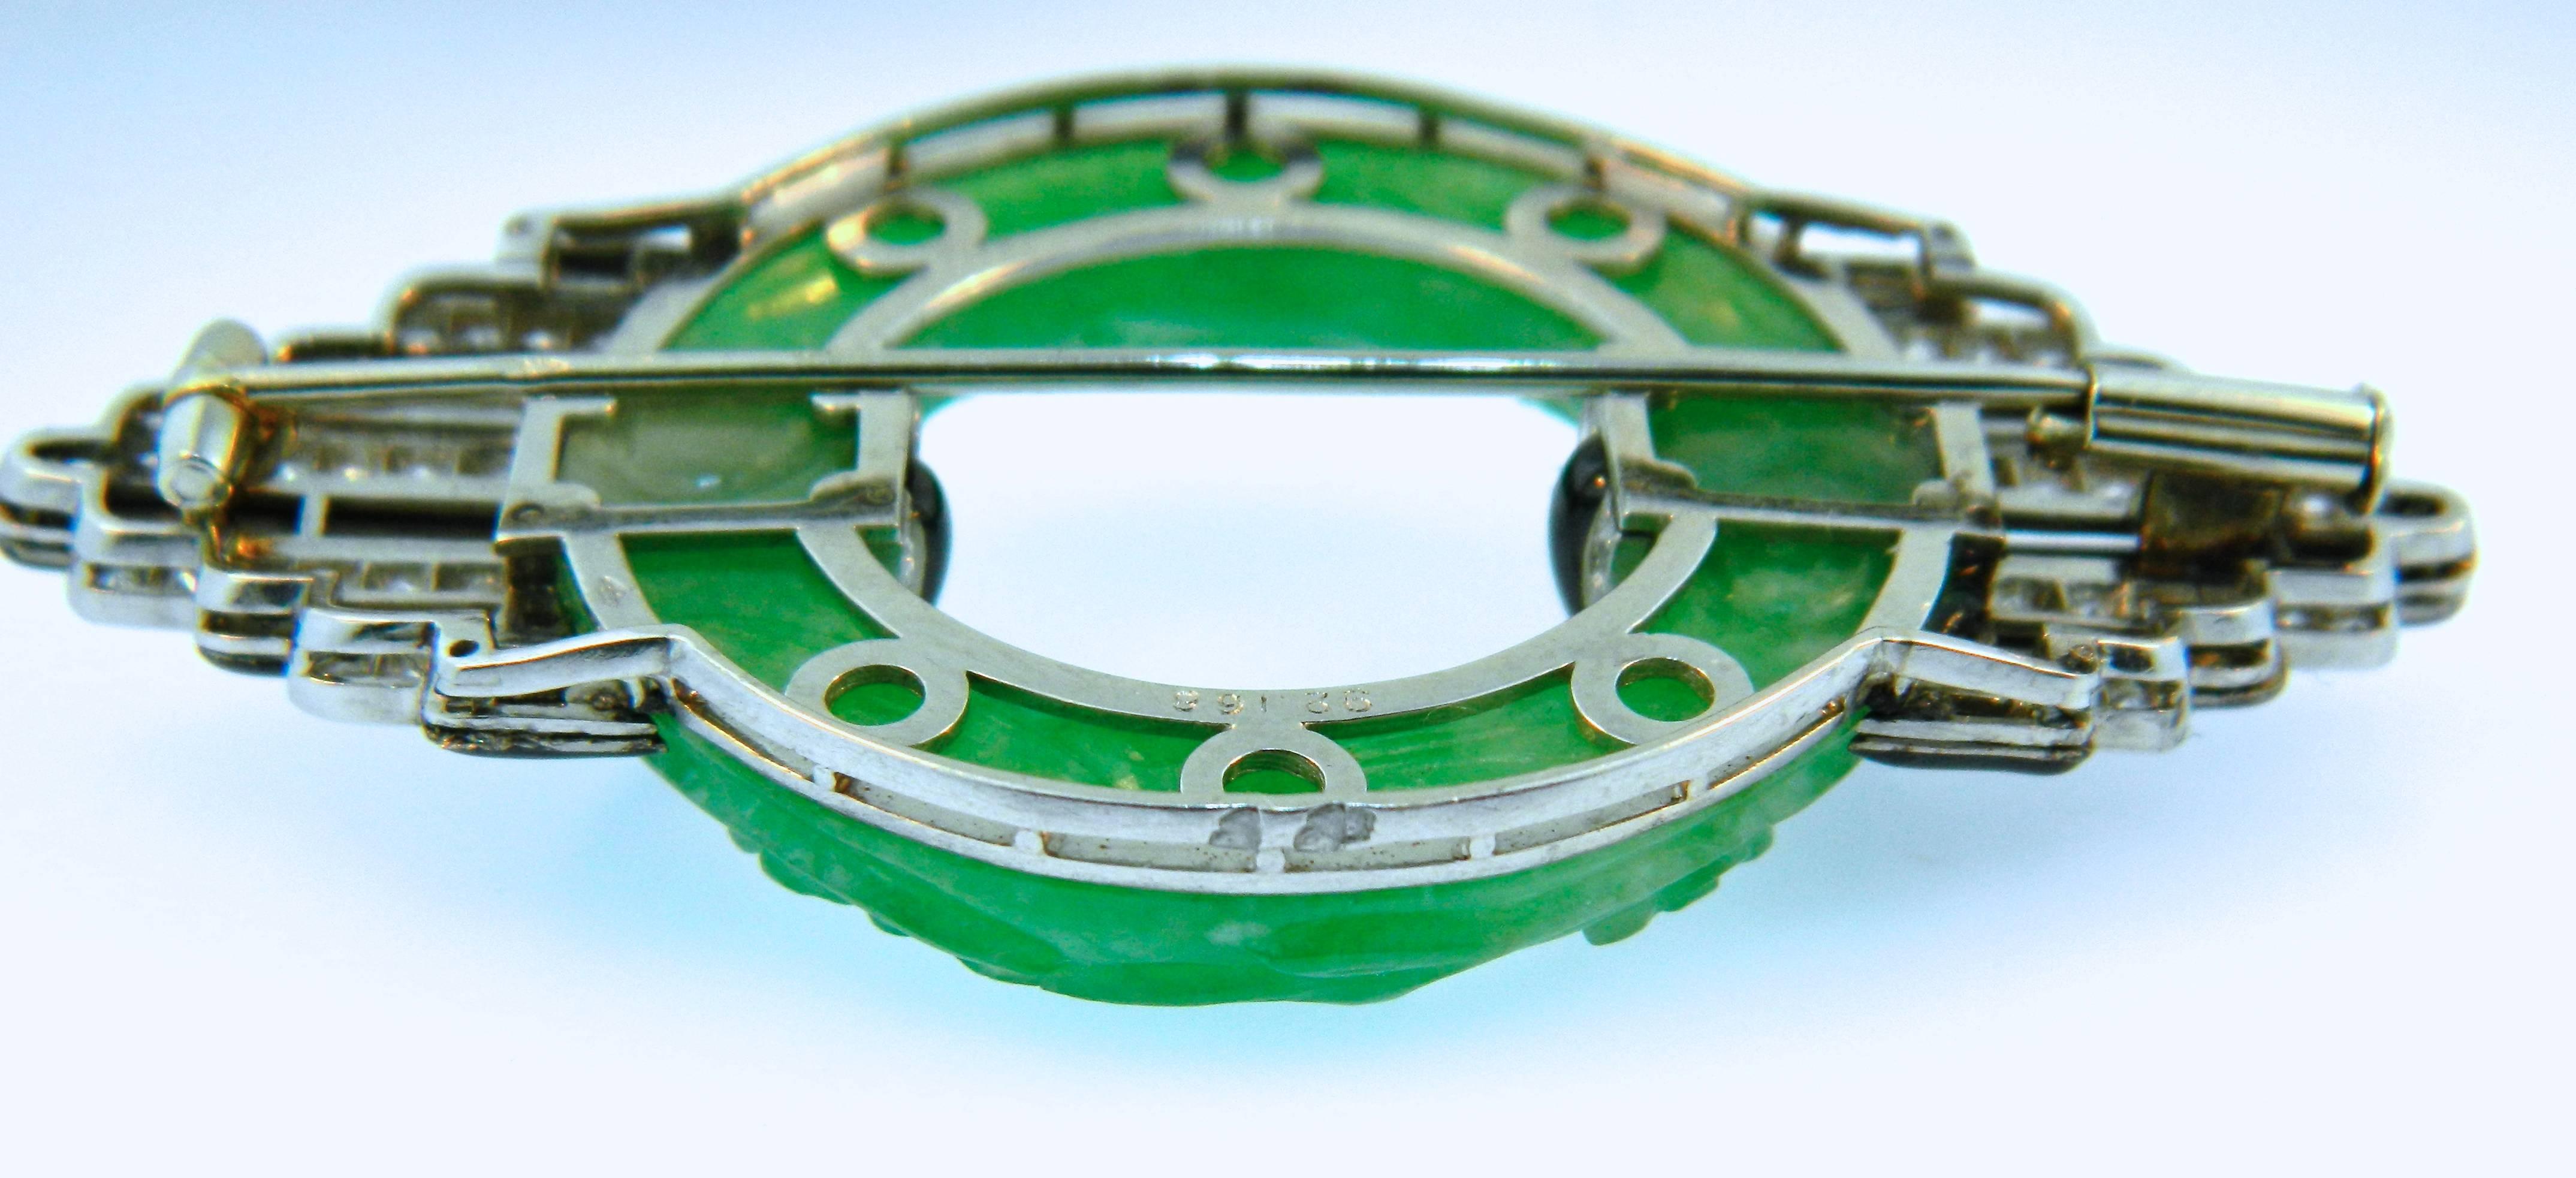 A wonderful French 1920s Art Deco Platinum, Diamond, Onyx and Carved Jadeite Jade Belt Buckle Brooch.  French Marks For Platinum, Maker's Marks and Numbers.  Definitely made by an important and well known french workshop.